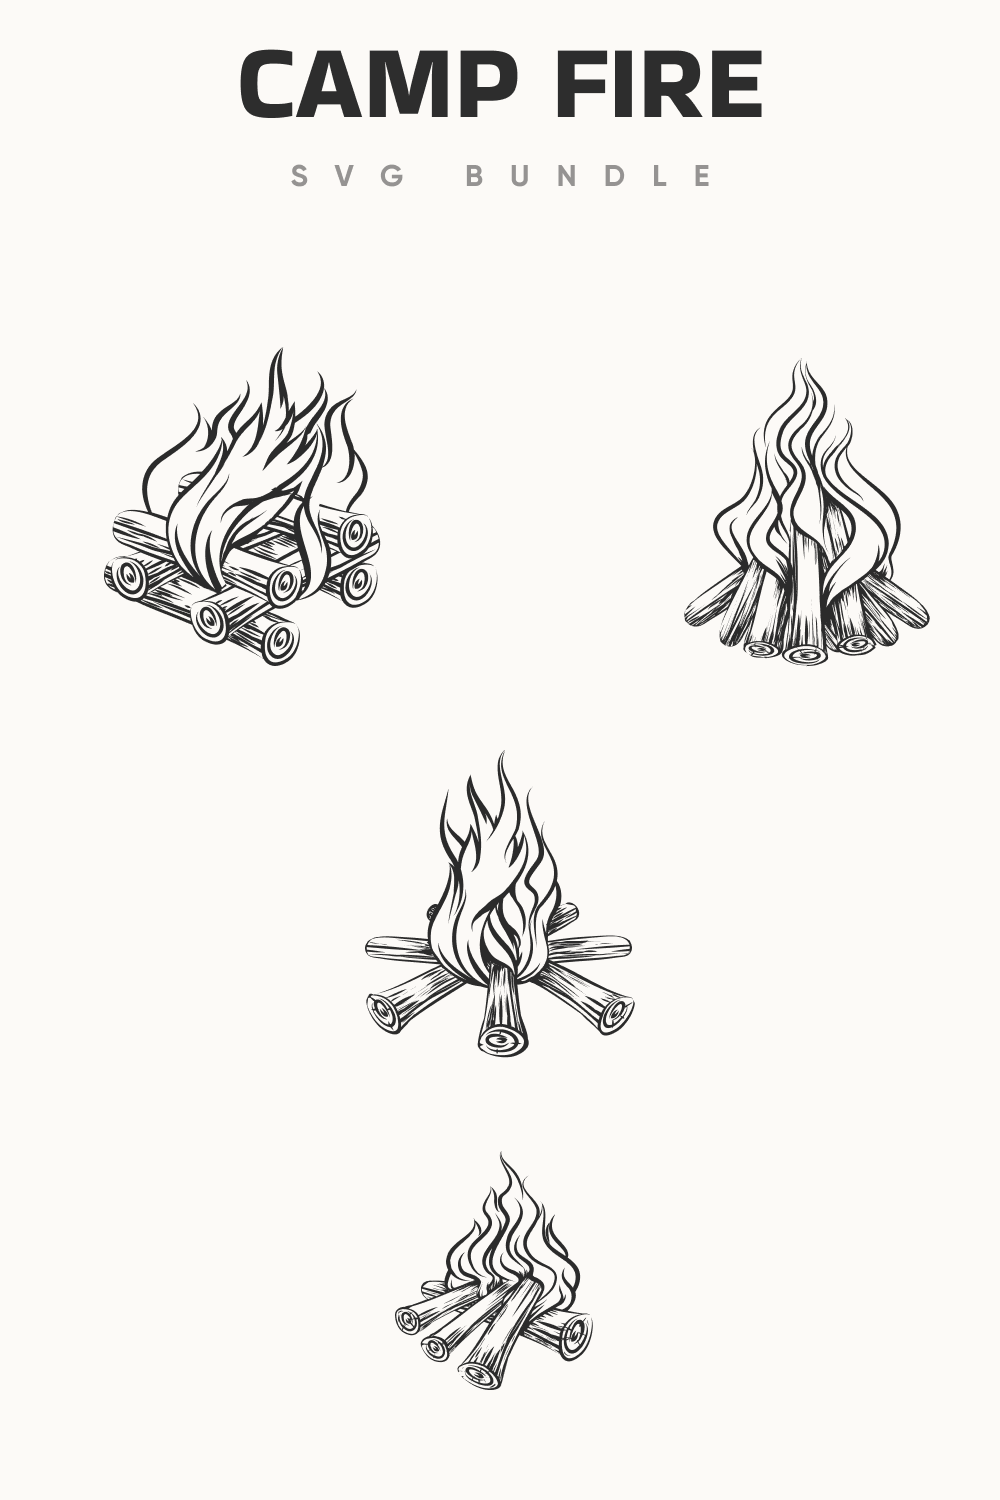 Different fire shapes.